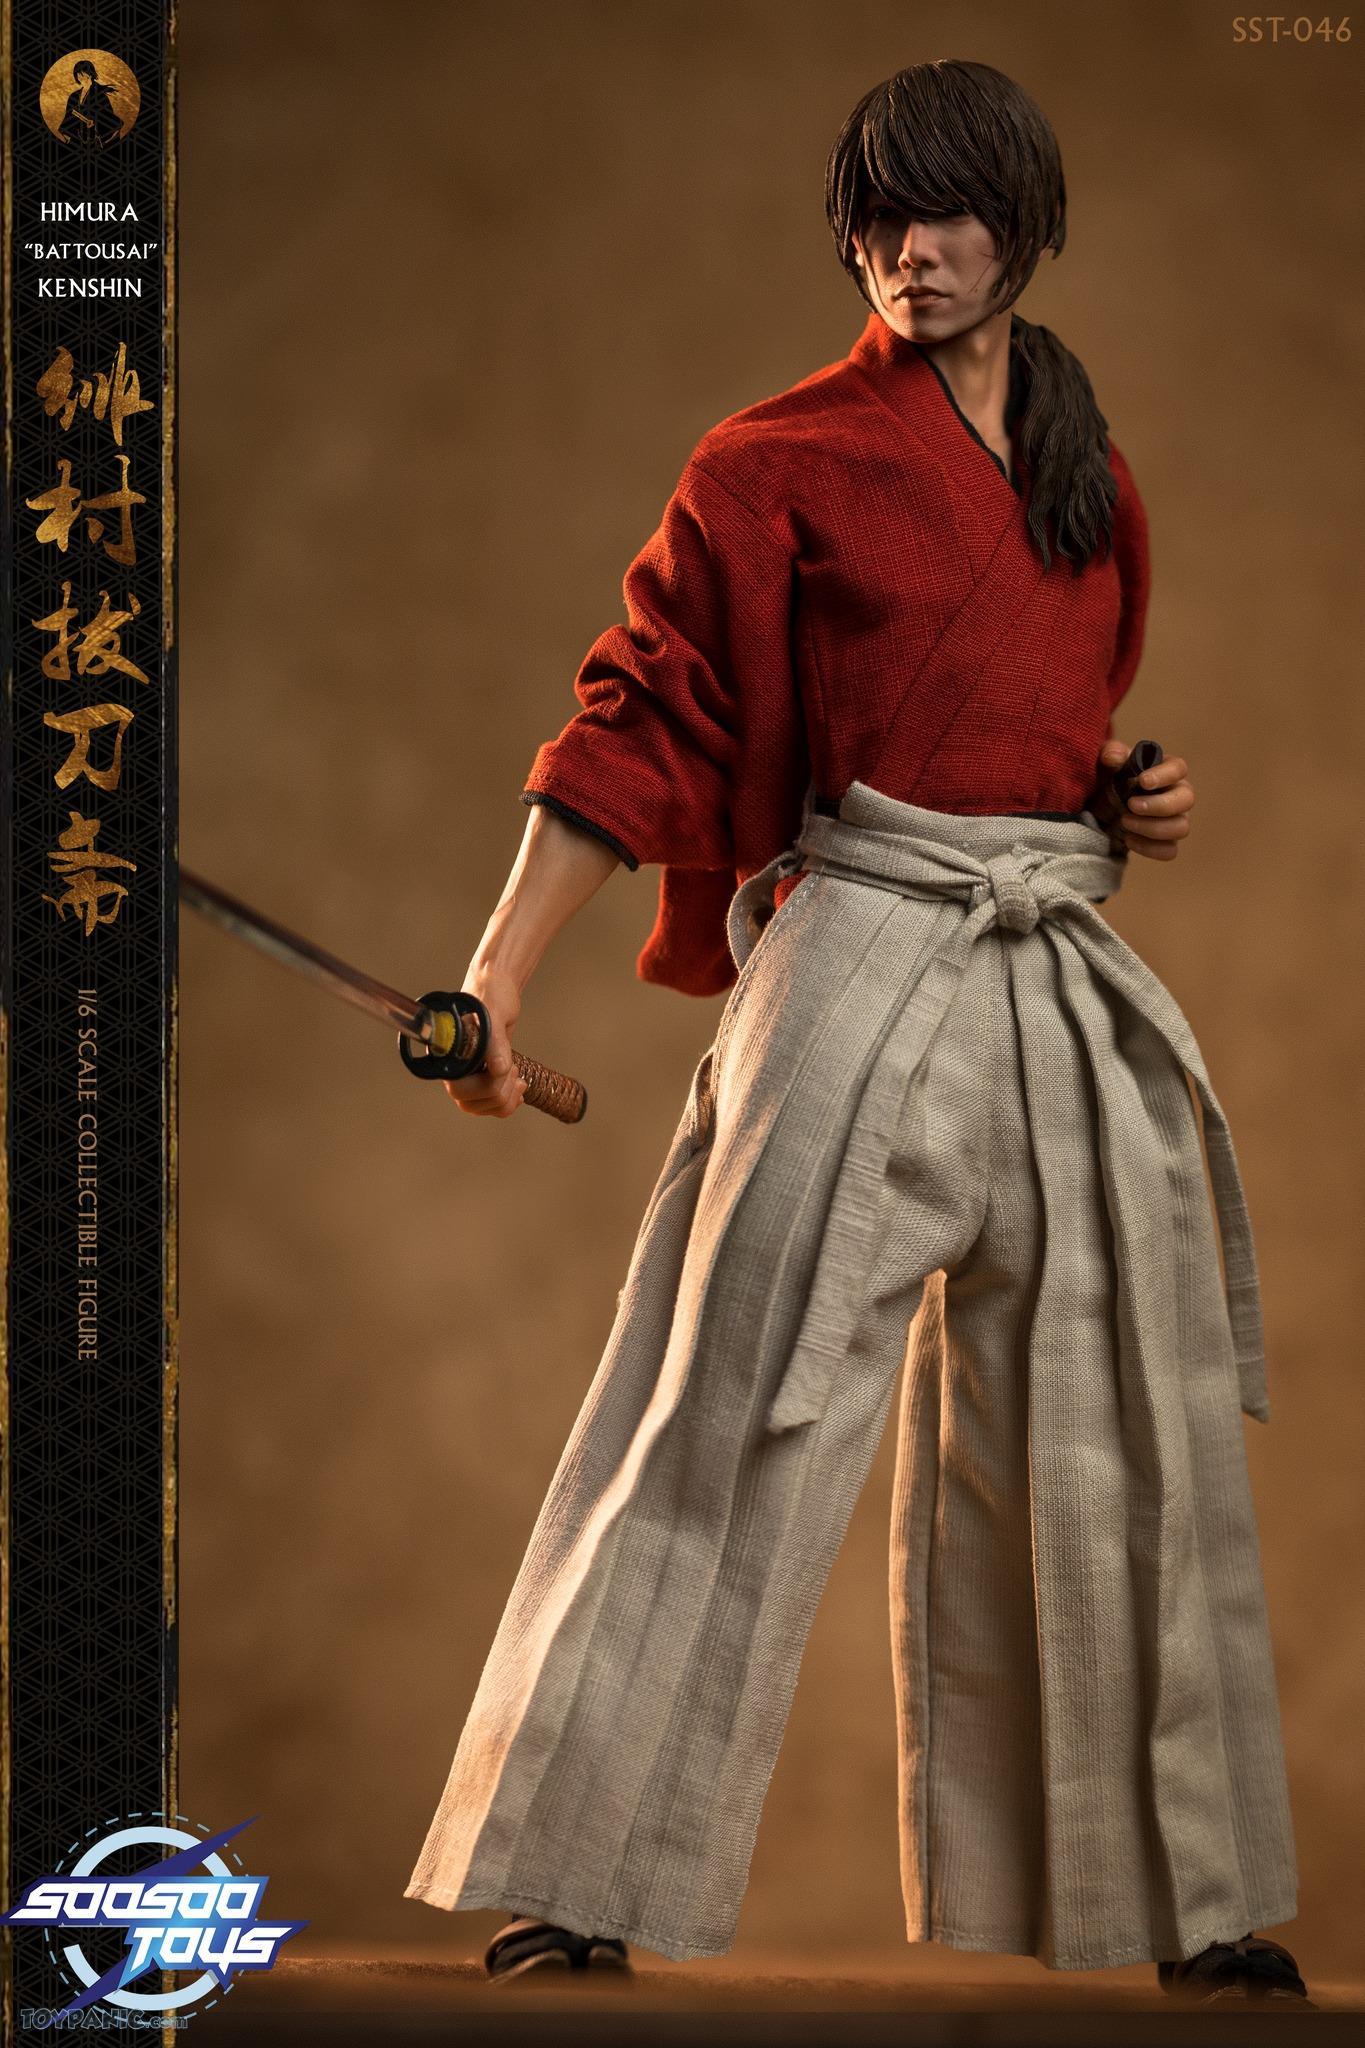 Japanese - NEW PRODUCT: 1/6 scale Rurouni Kenshin Collectible Figure from SooSooToys 712202251232PM_7300100